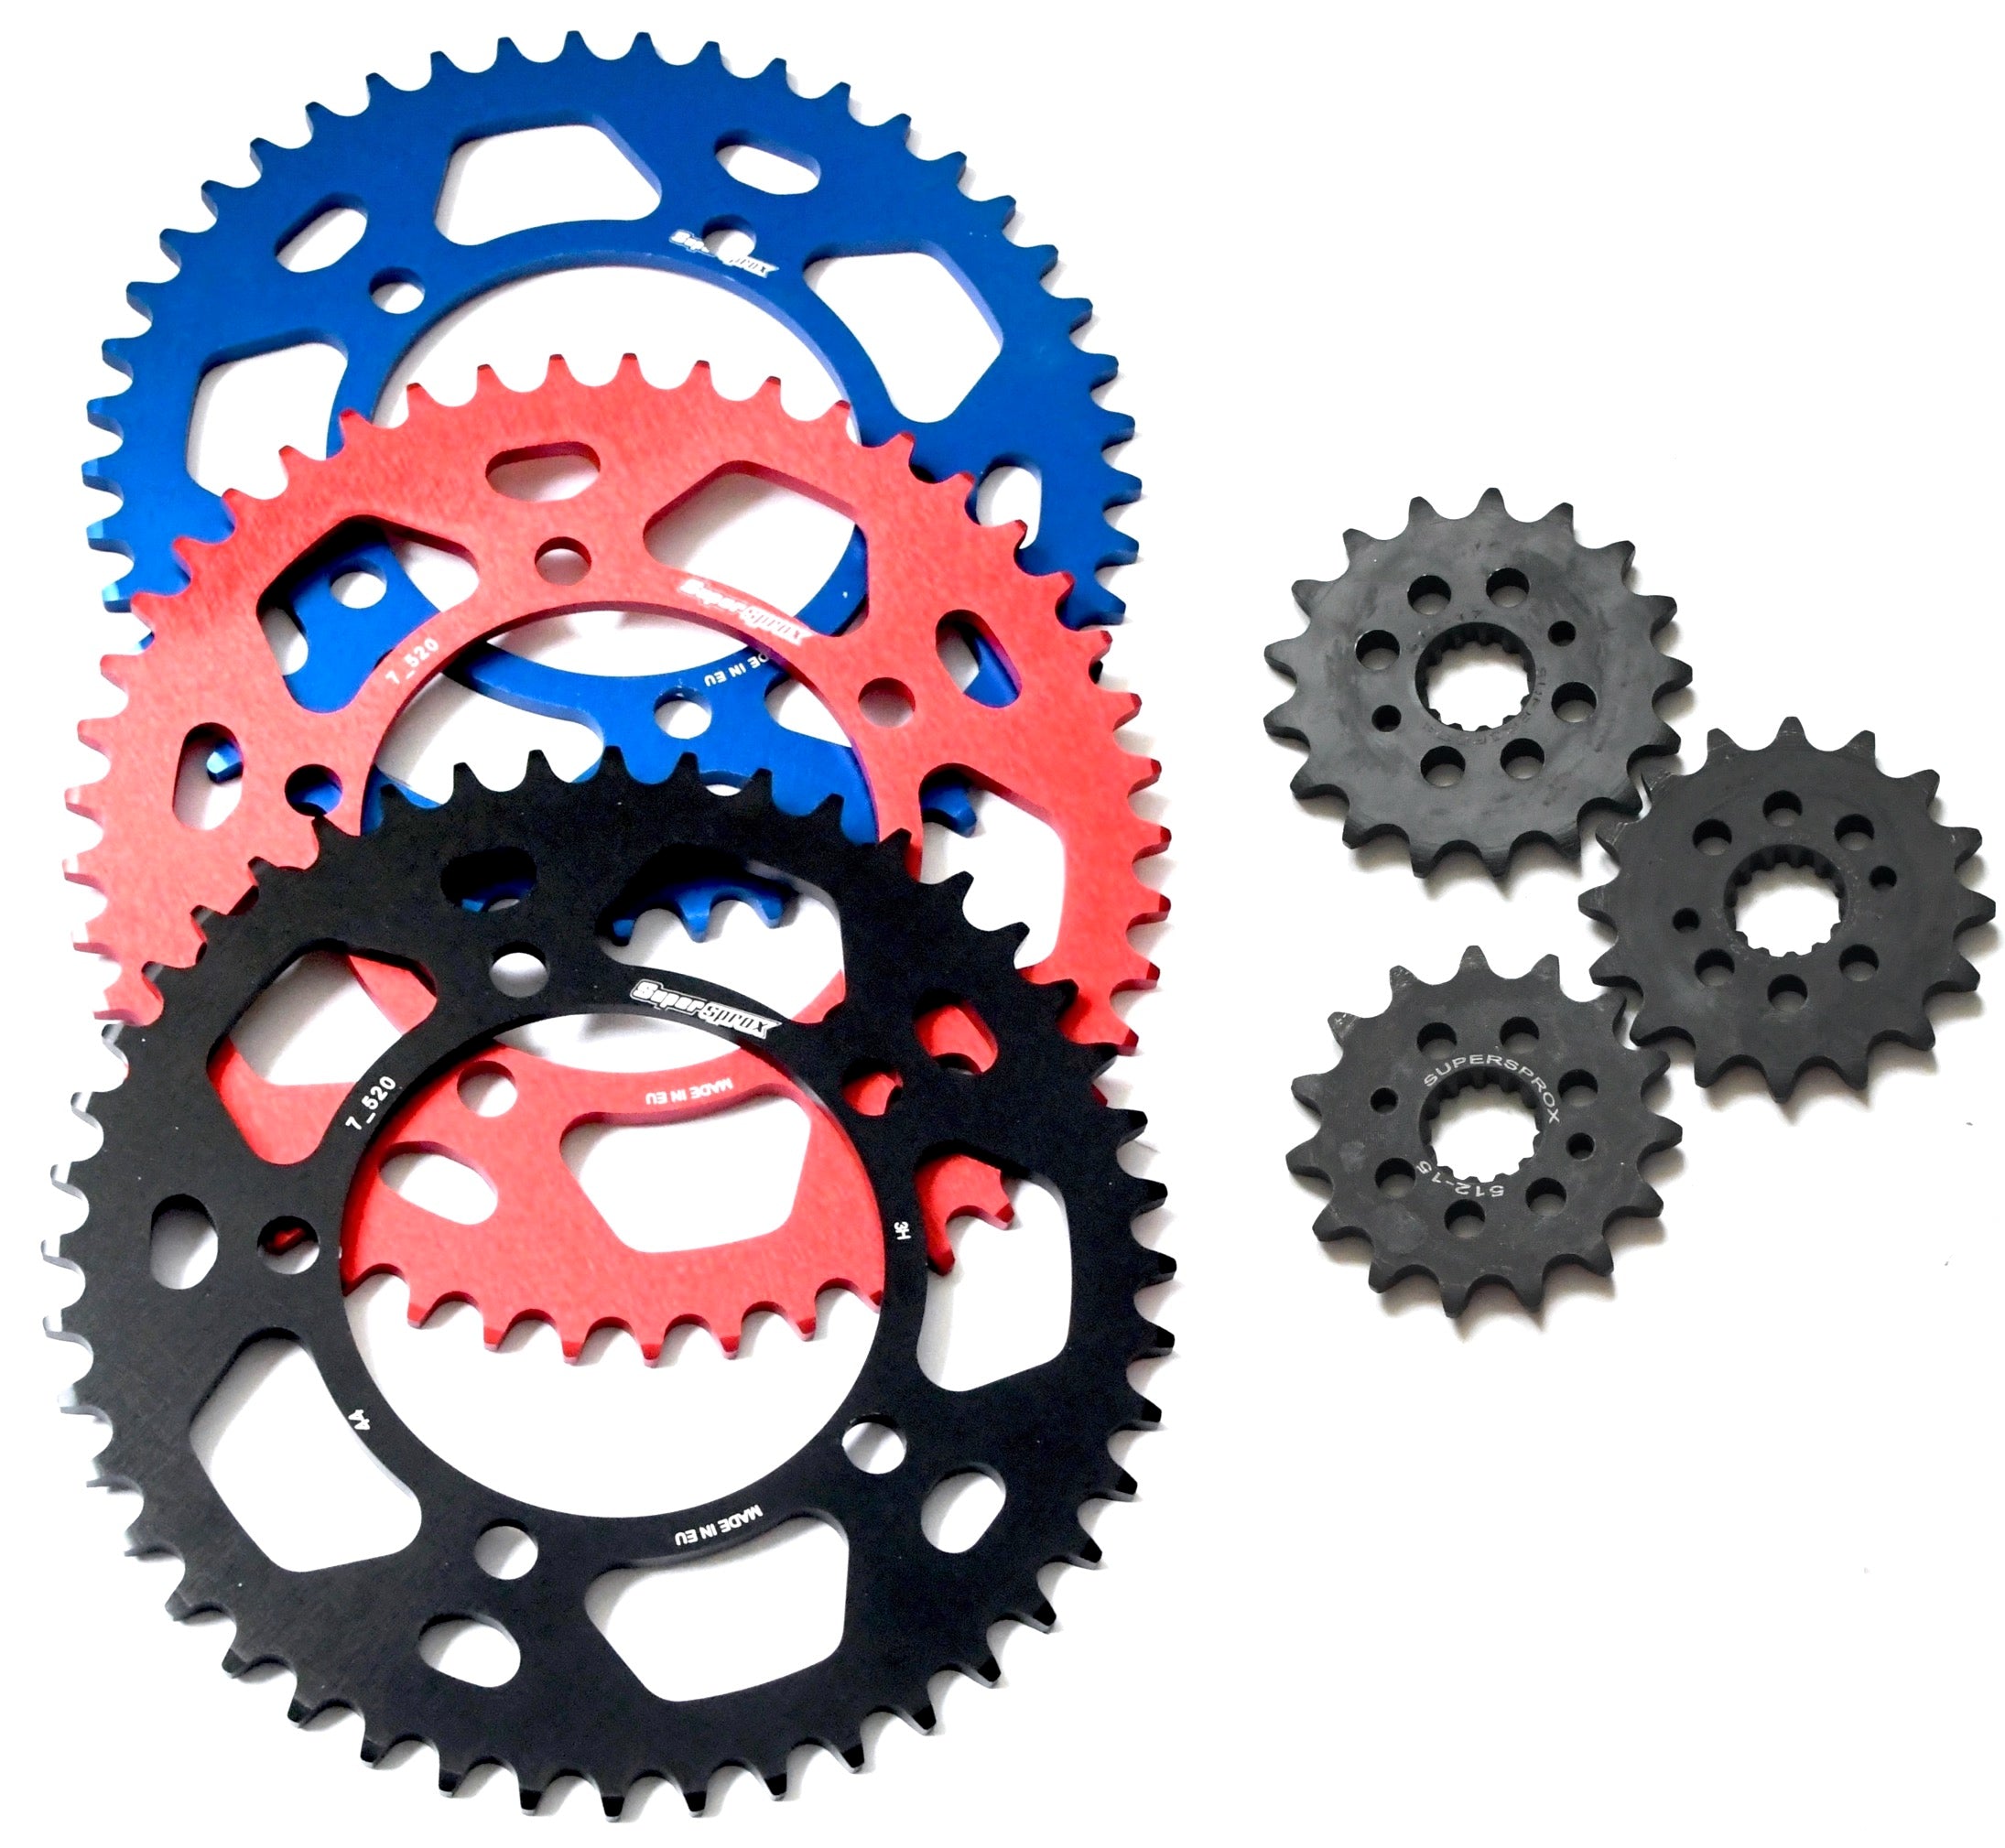 Supersprox 520 Conversion Racing Sprocket Kit for Yamaha YZF-R6 2003-Current & YZF-R7 1999-2002 - Choose Your Sprockets